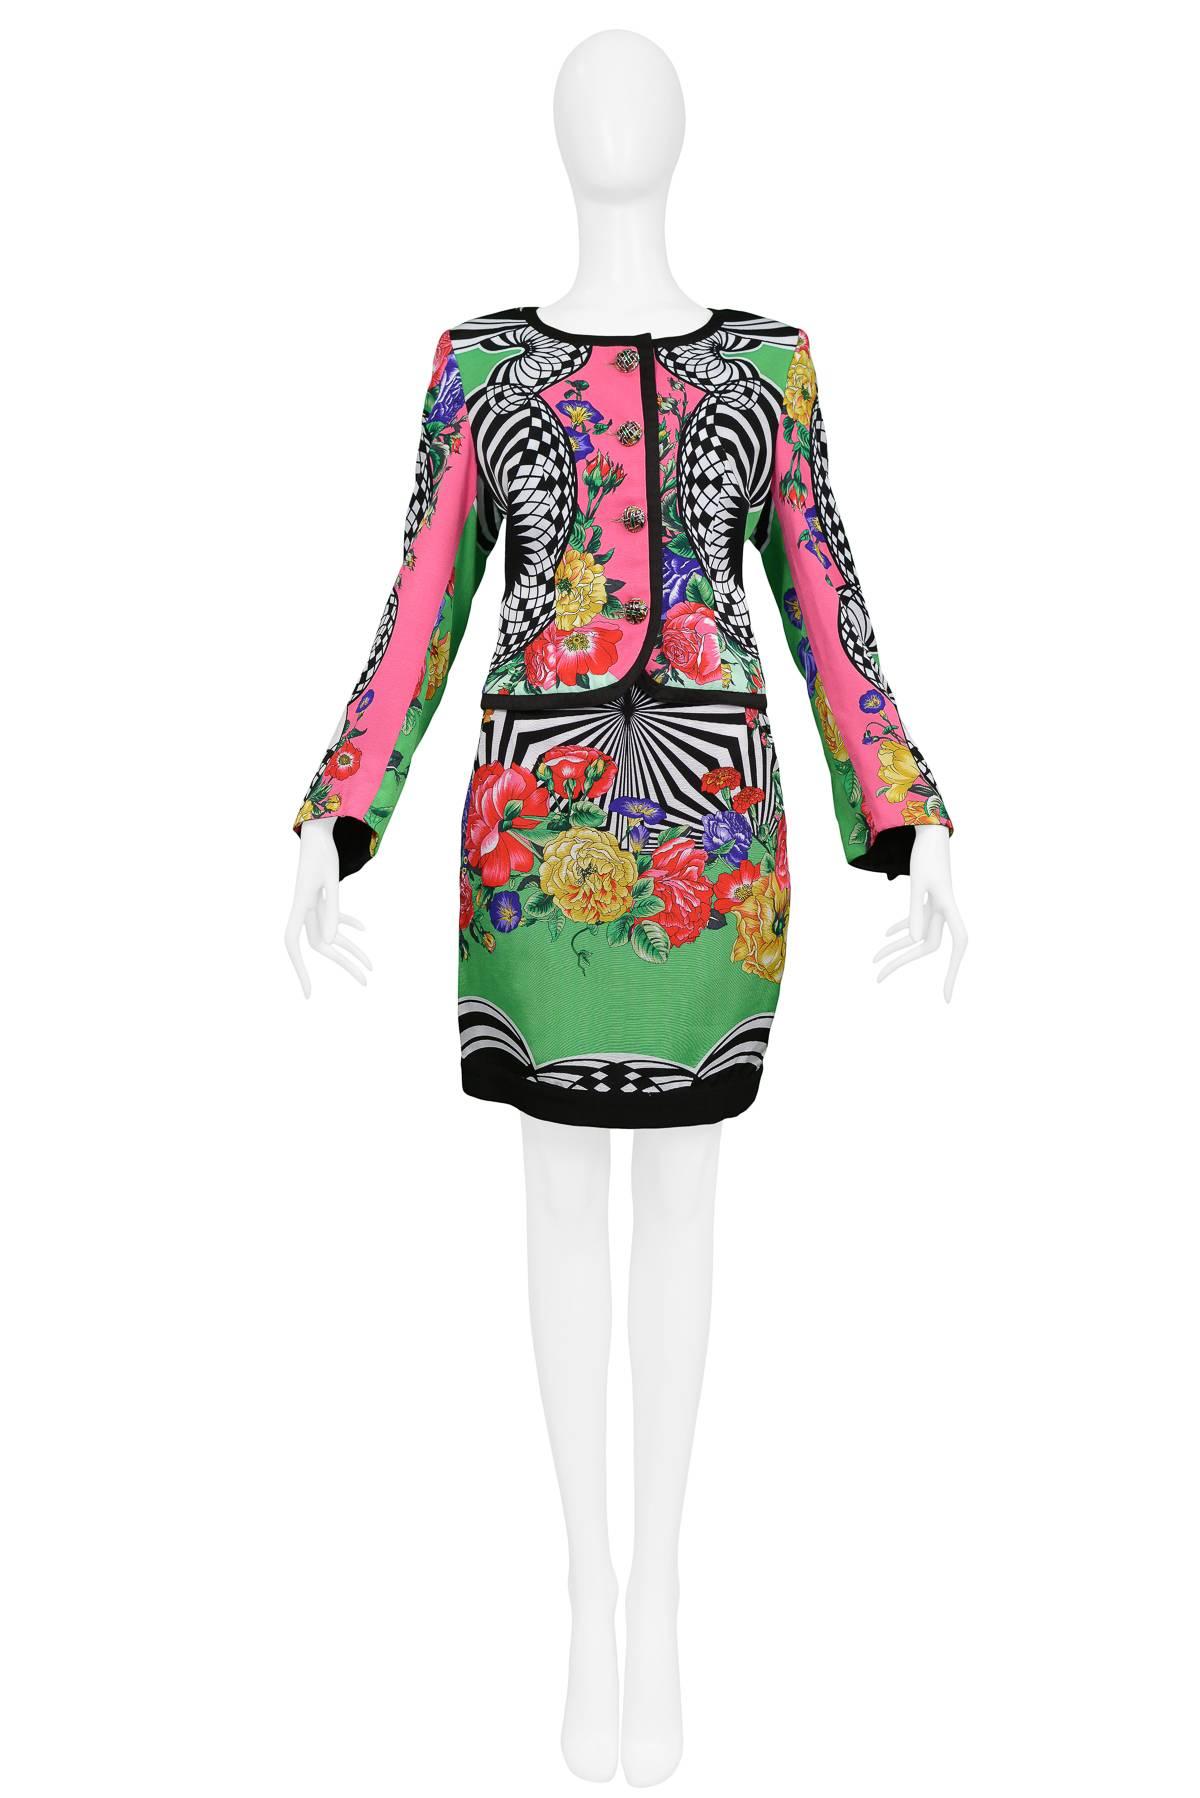 Resurrection Vintage is excited to offer a vintage Gianni Versace Jeans Couture Op art and floral jacket and skirt ensemble. The jacket features novelty buttons and red trim details. The skirt has a classic slim fit. Collection 1992. 

Versace
Size